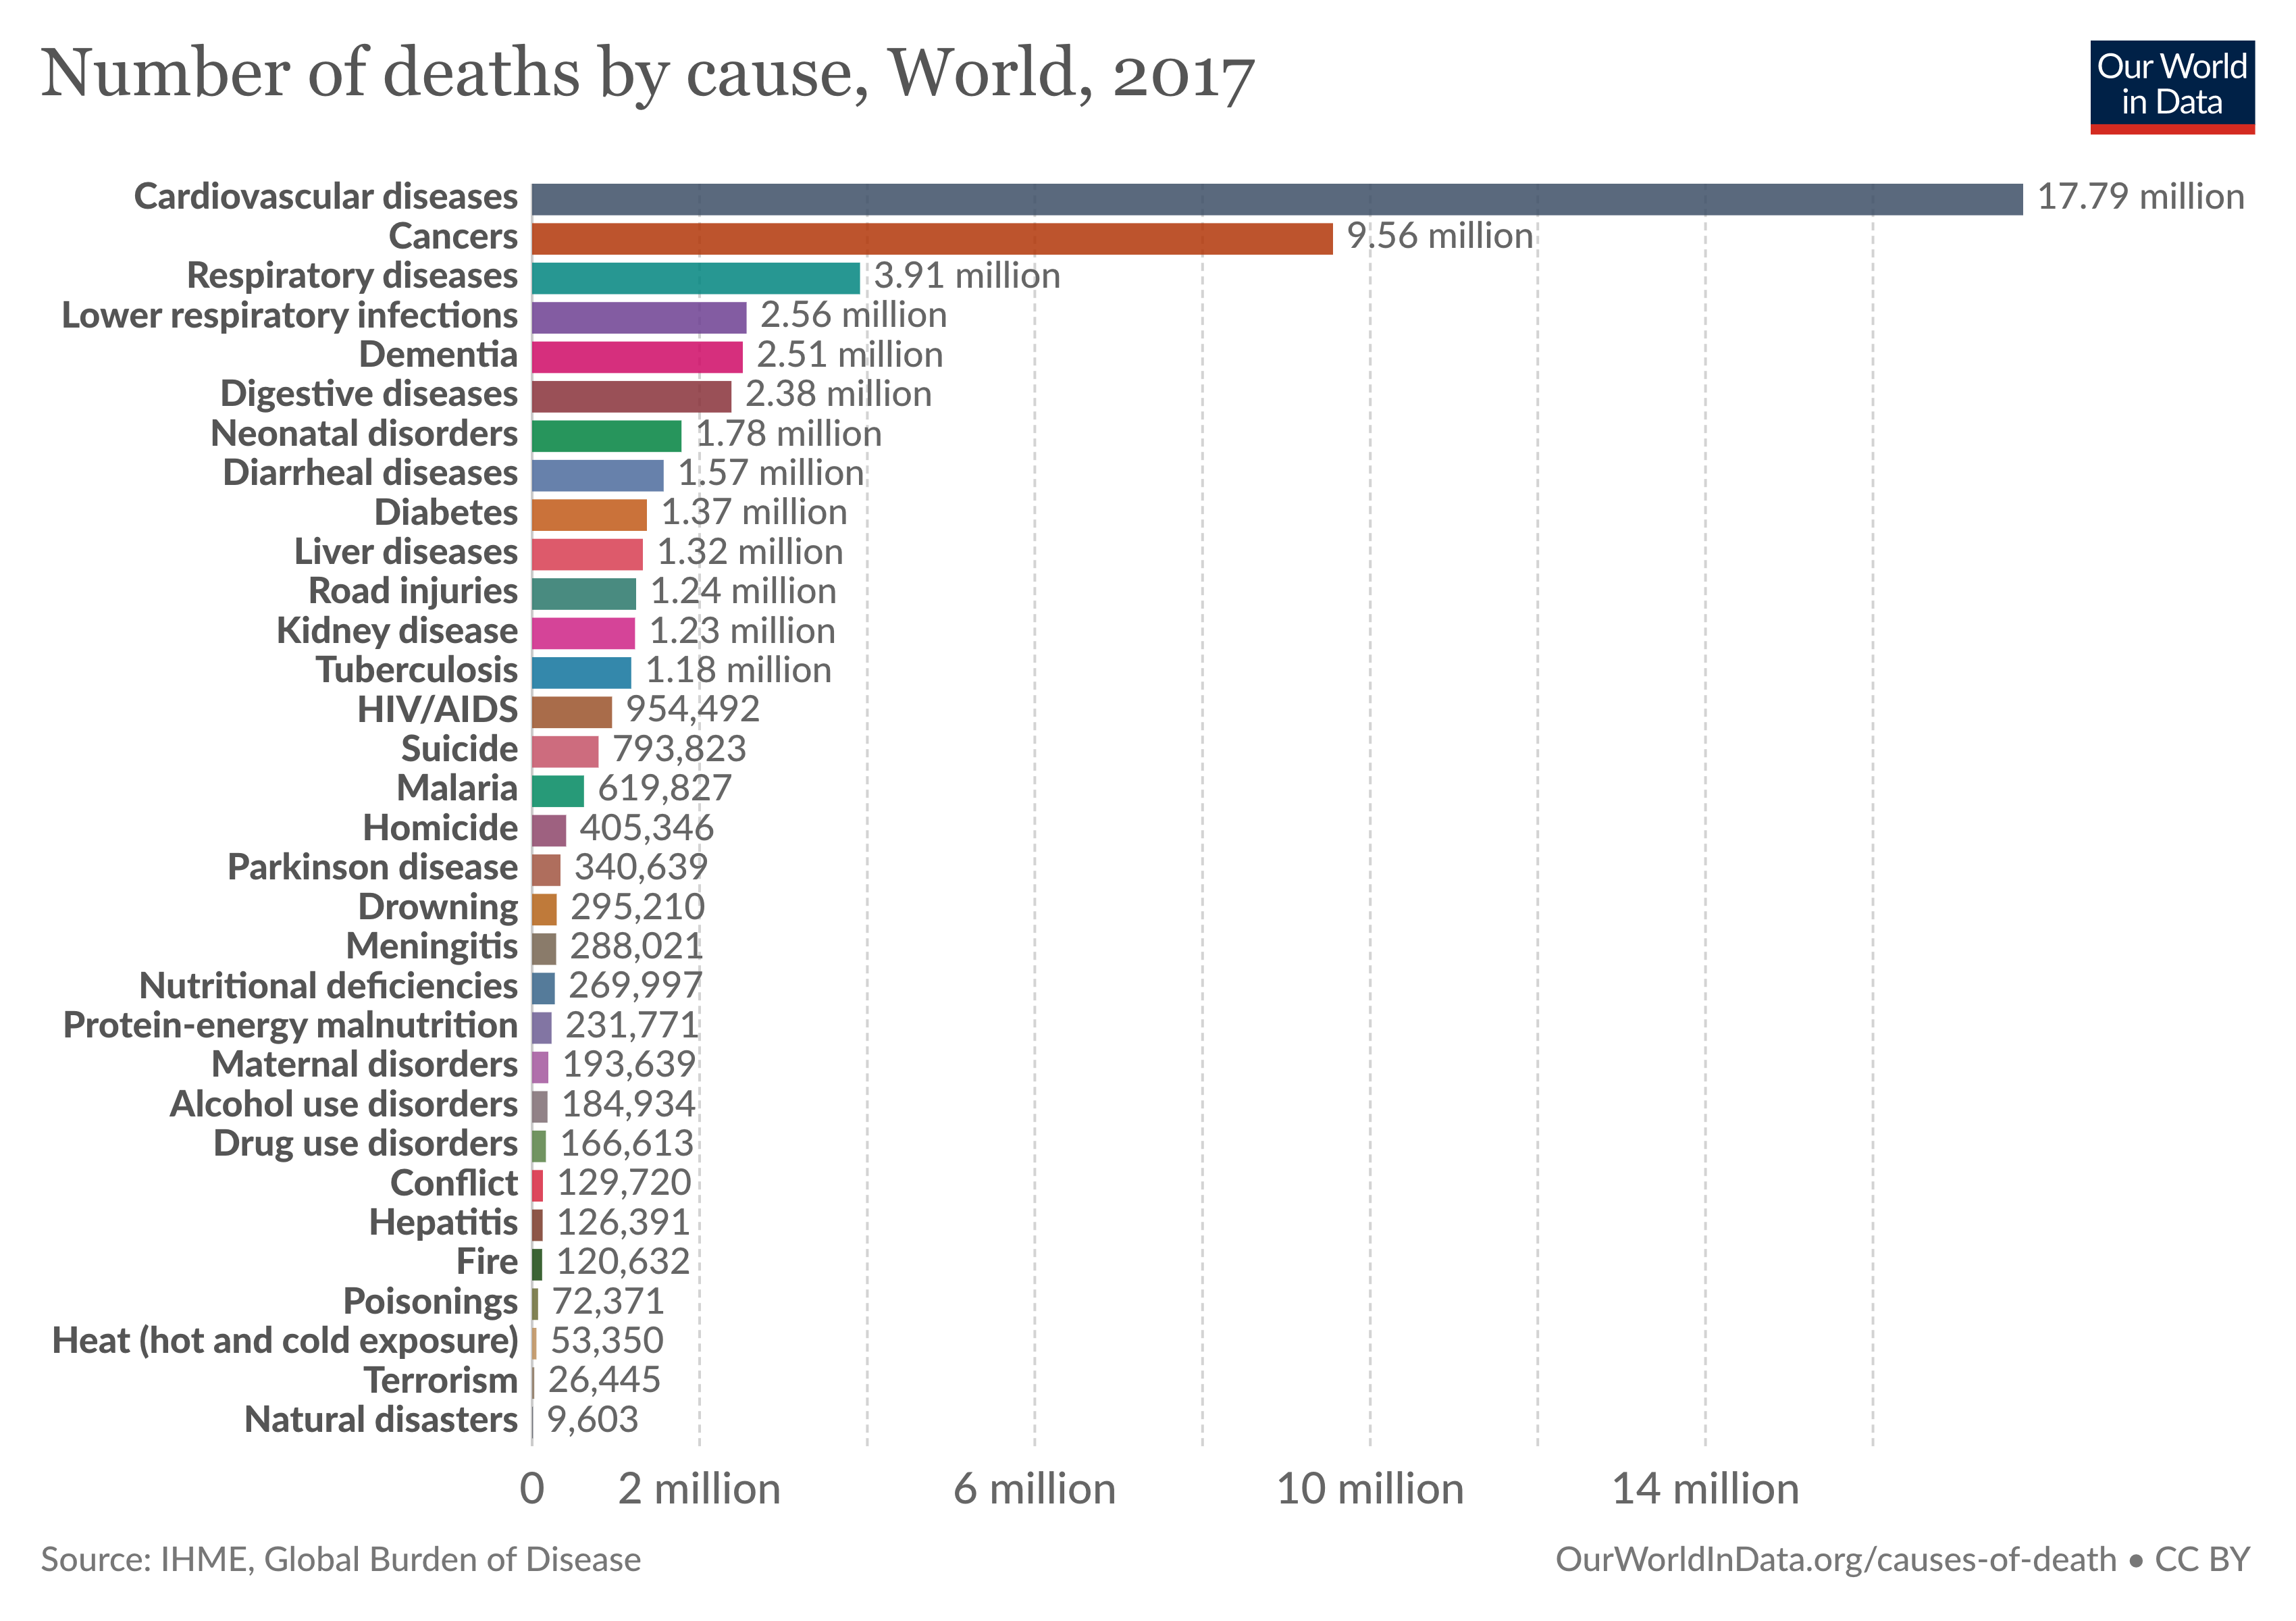 Annual Number of deaths